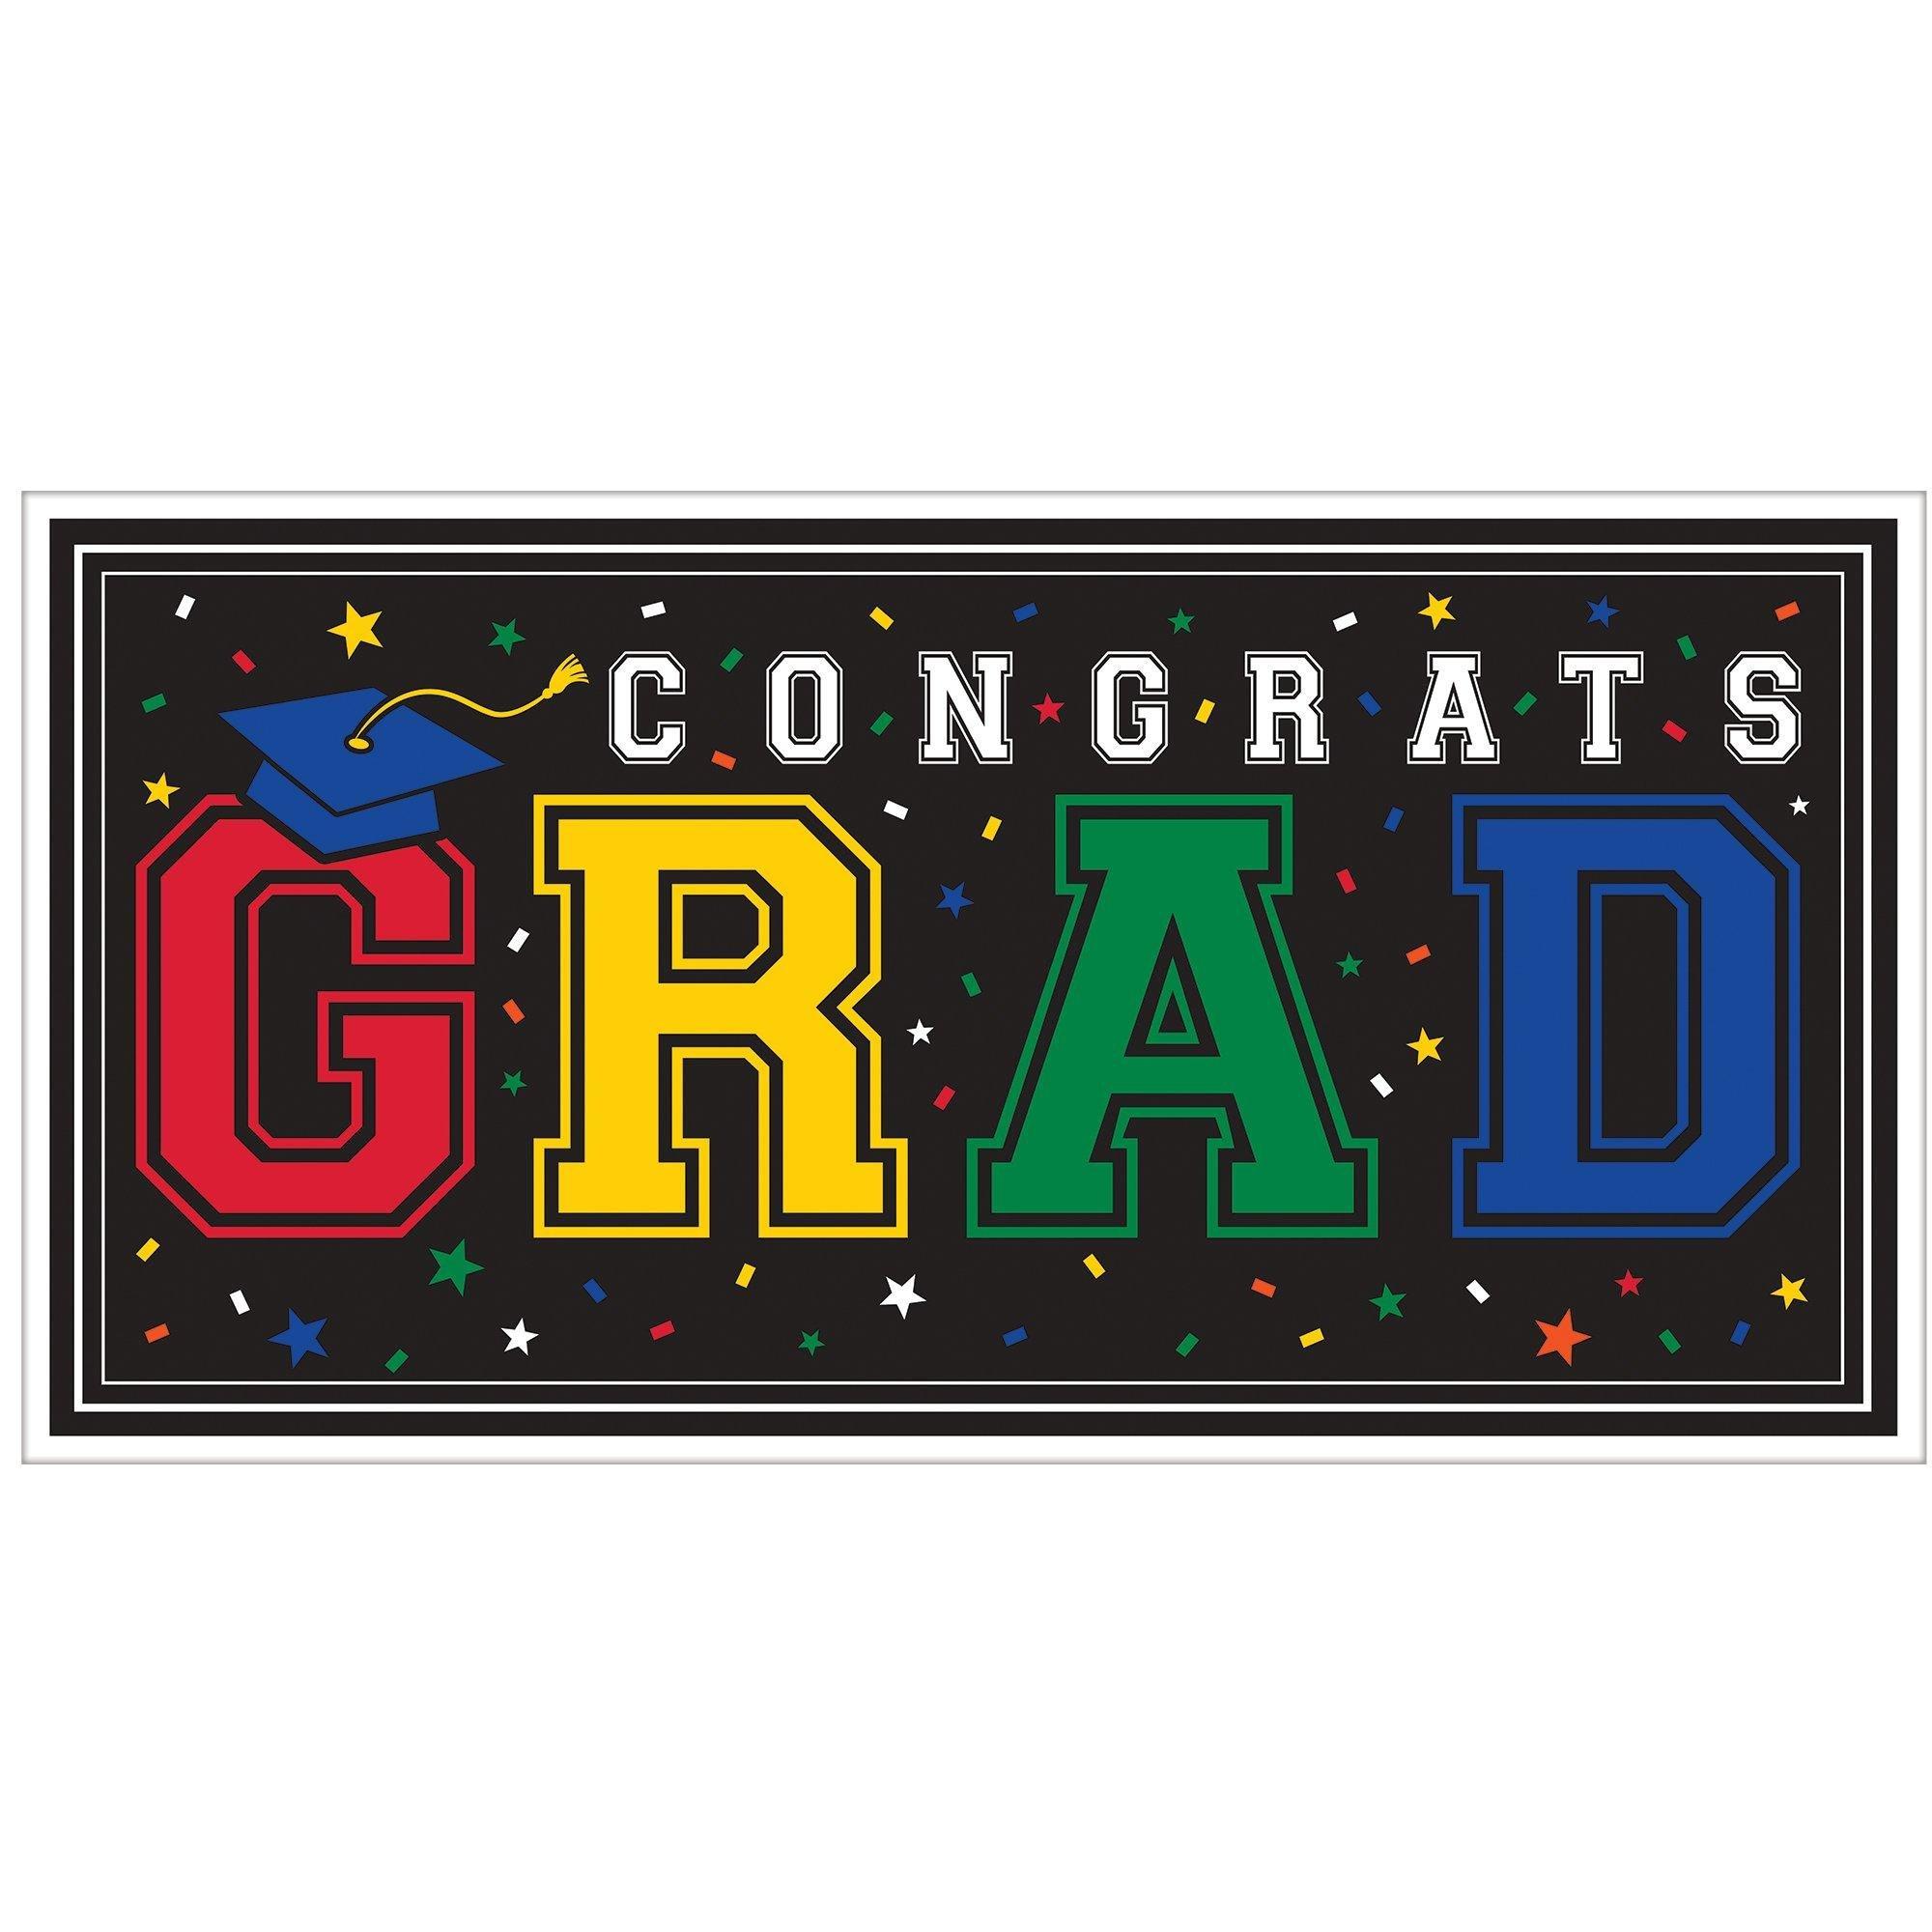 Graduation Party Supplies Kit for 60 with Decorations, Banners, Balloons, Plates, Napkins - Yellow Congrats Grad